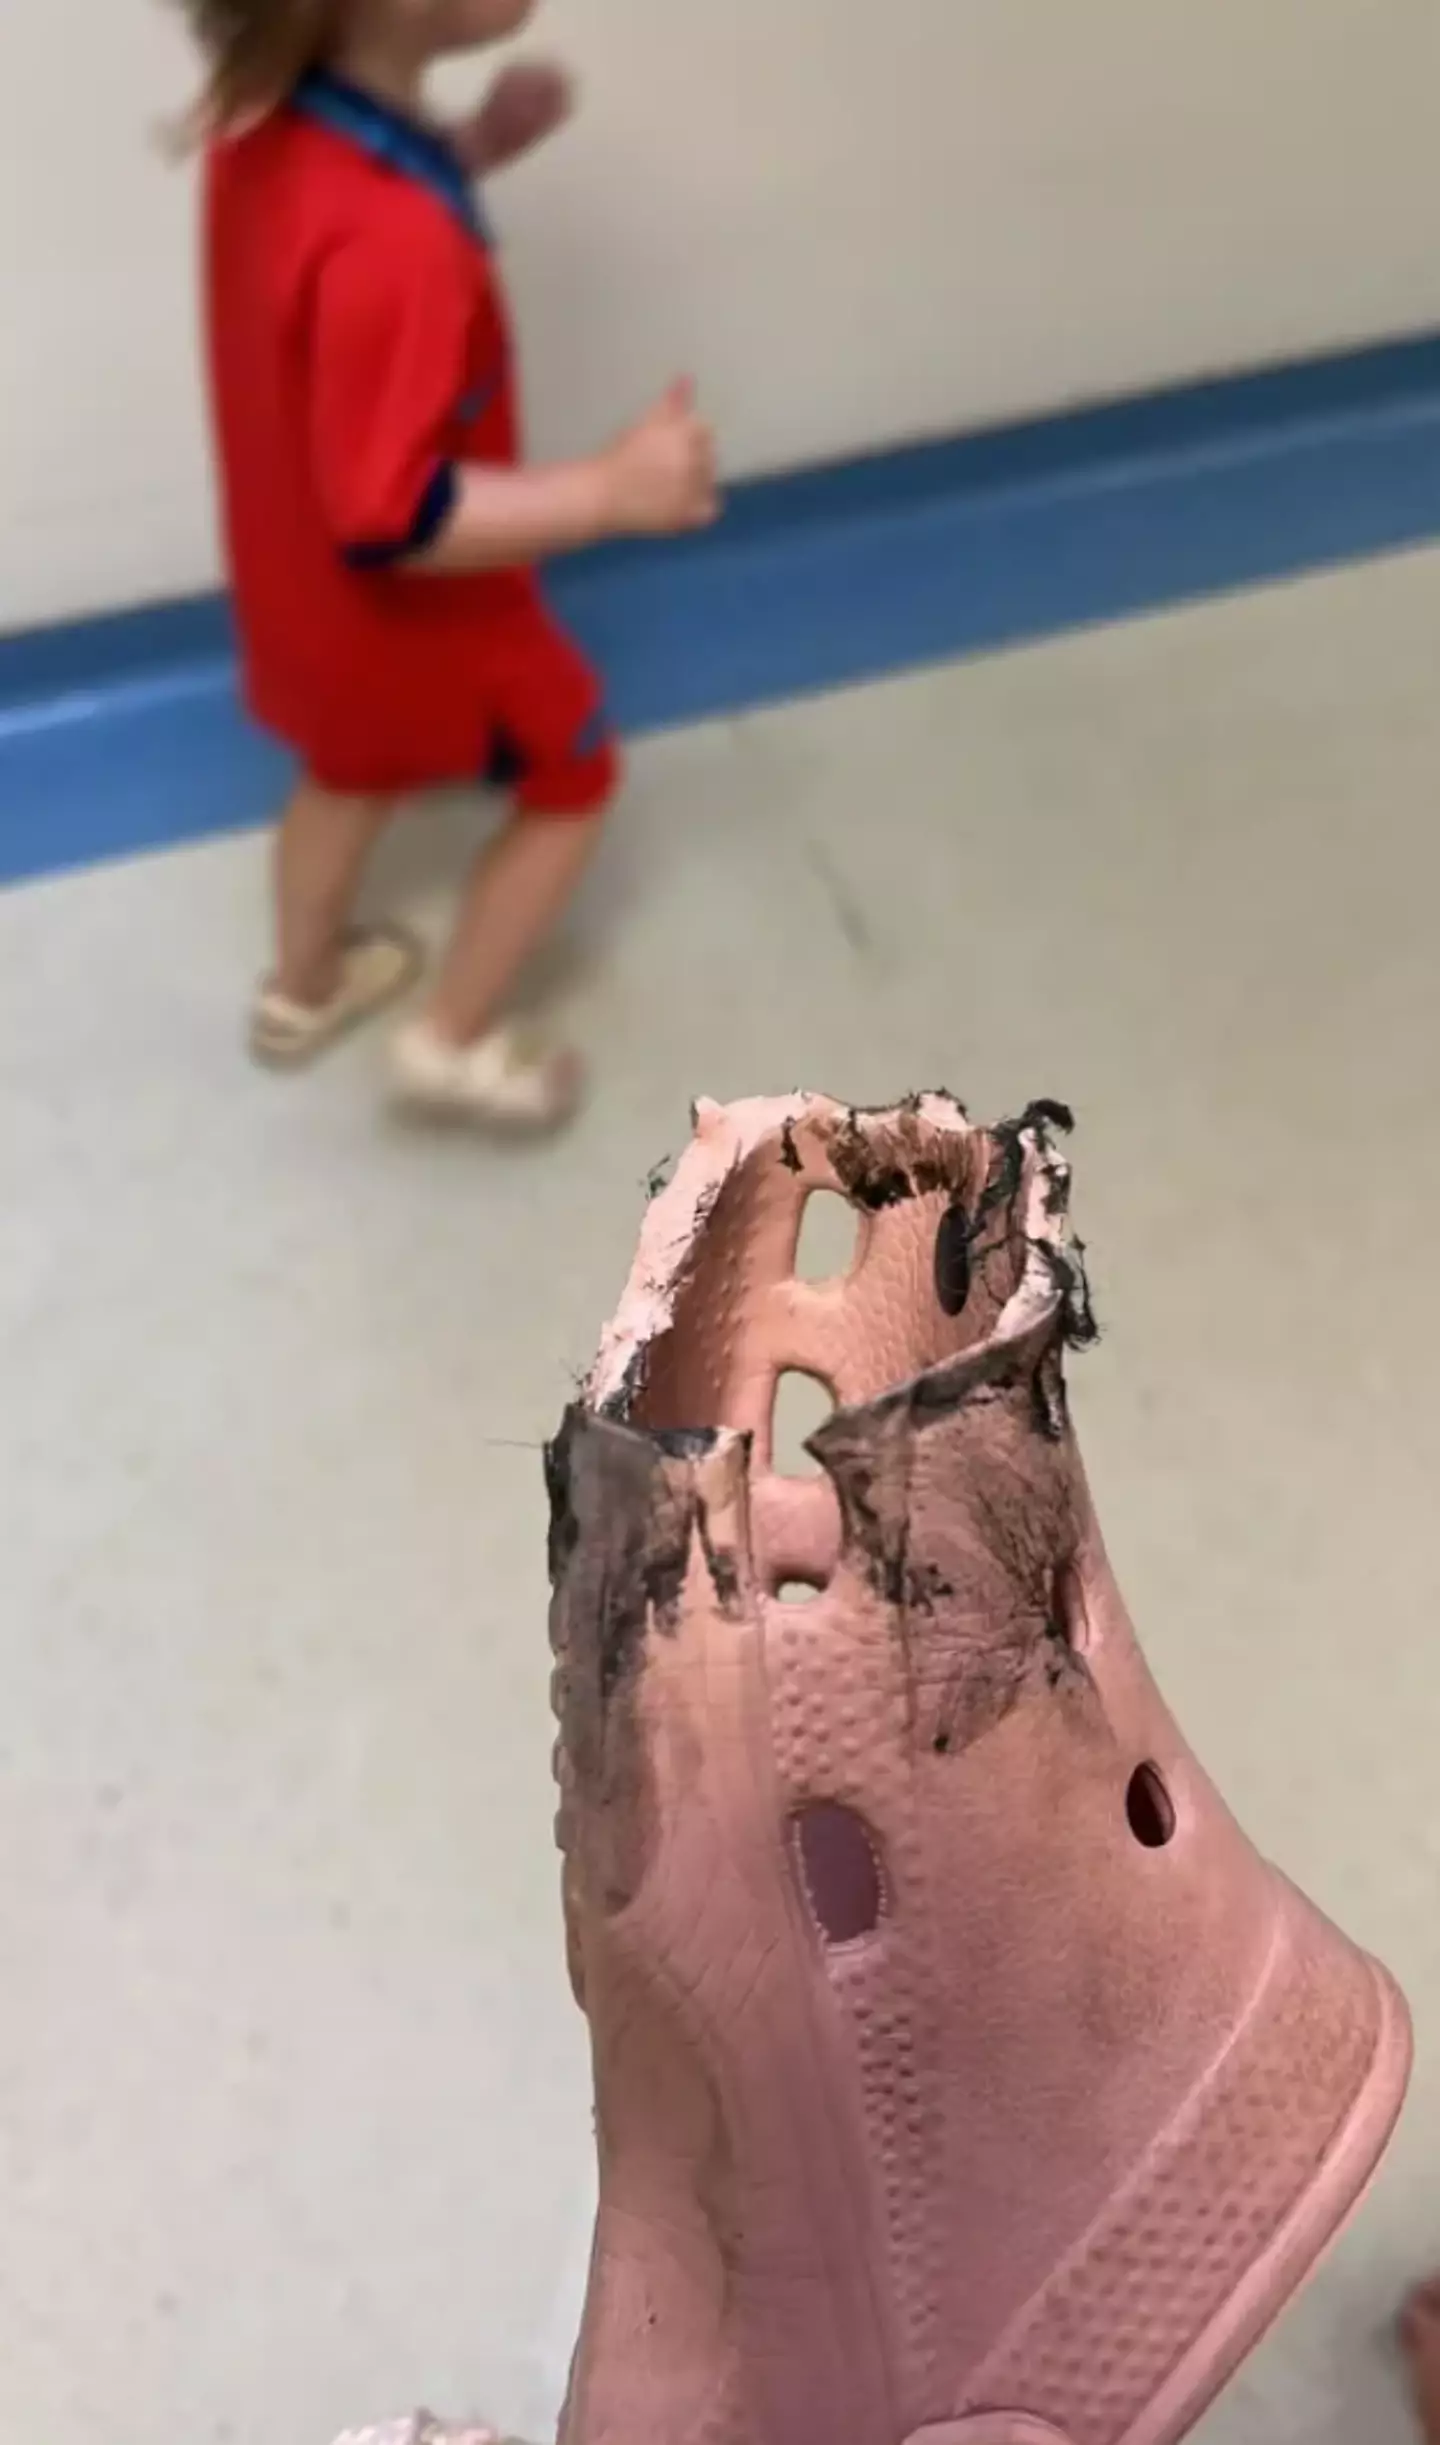 The entire toe was ripped from the rest of the shoe.